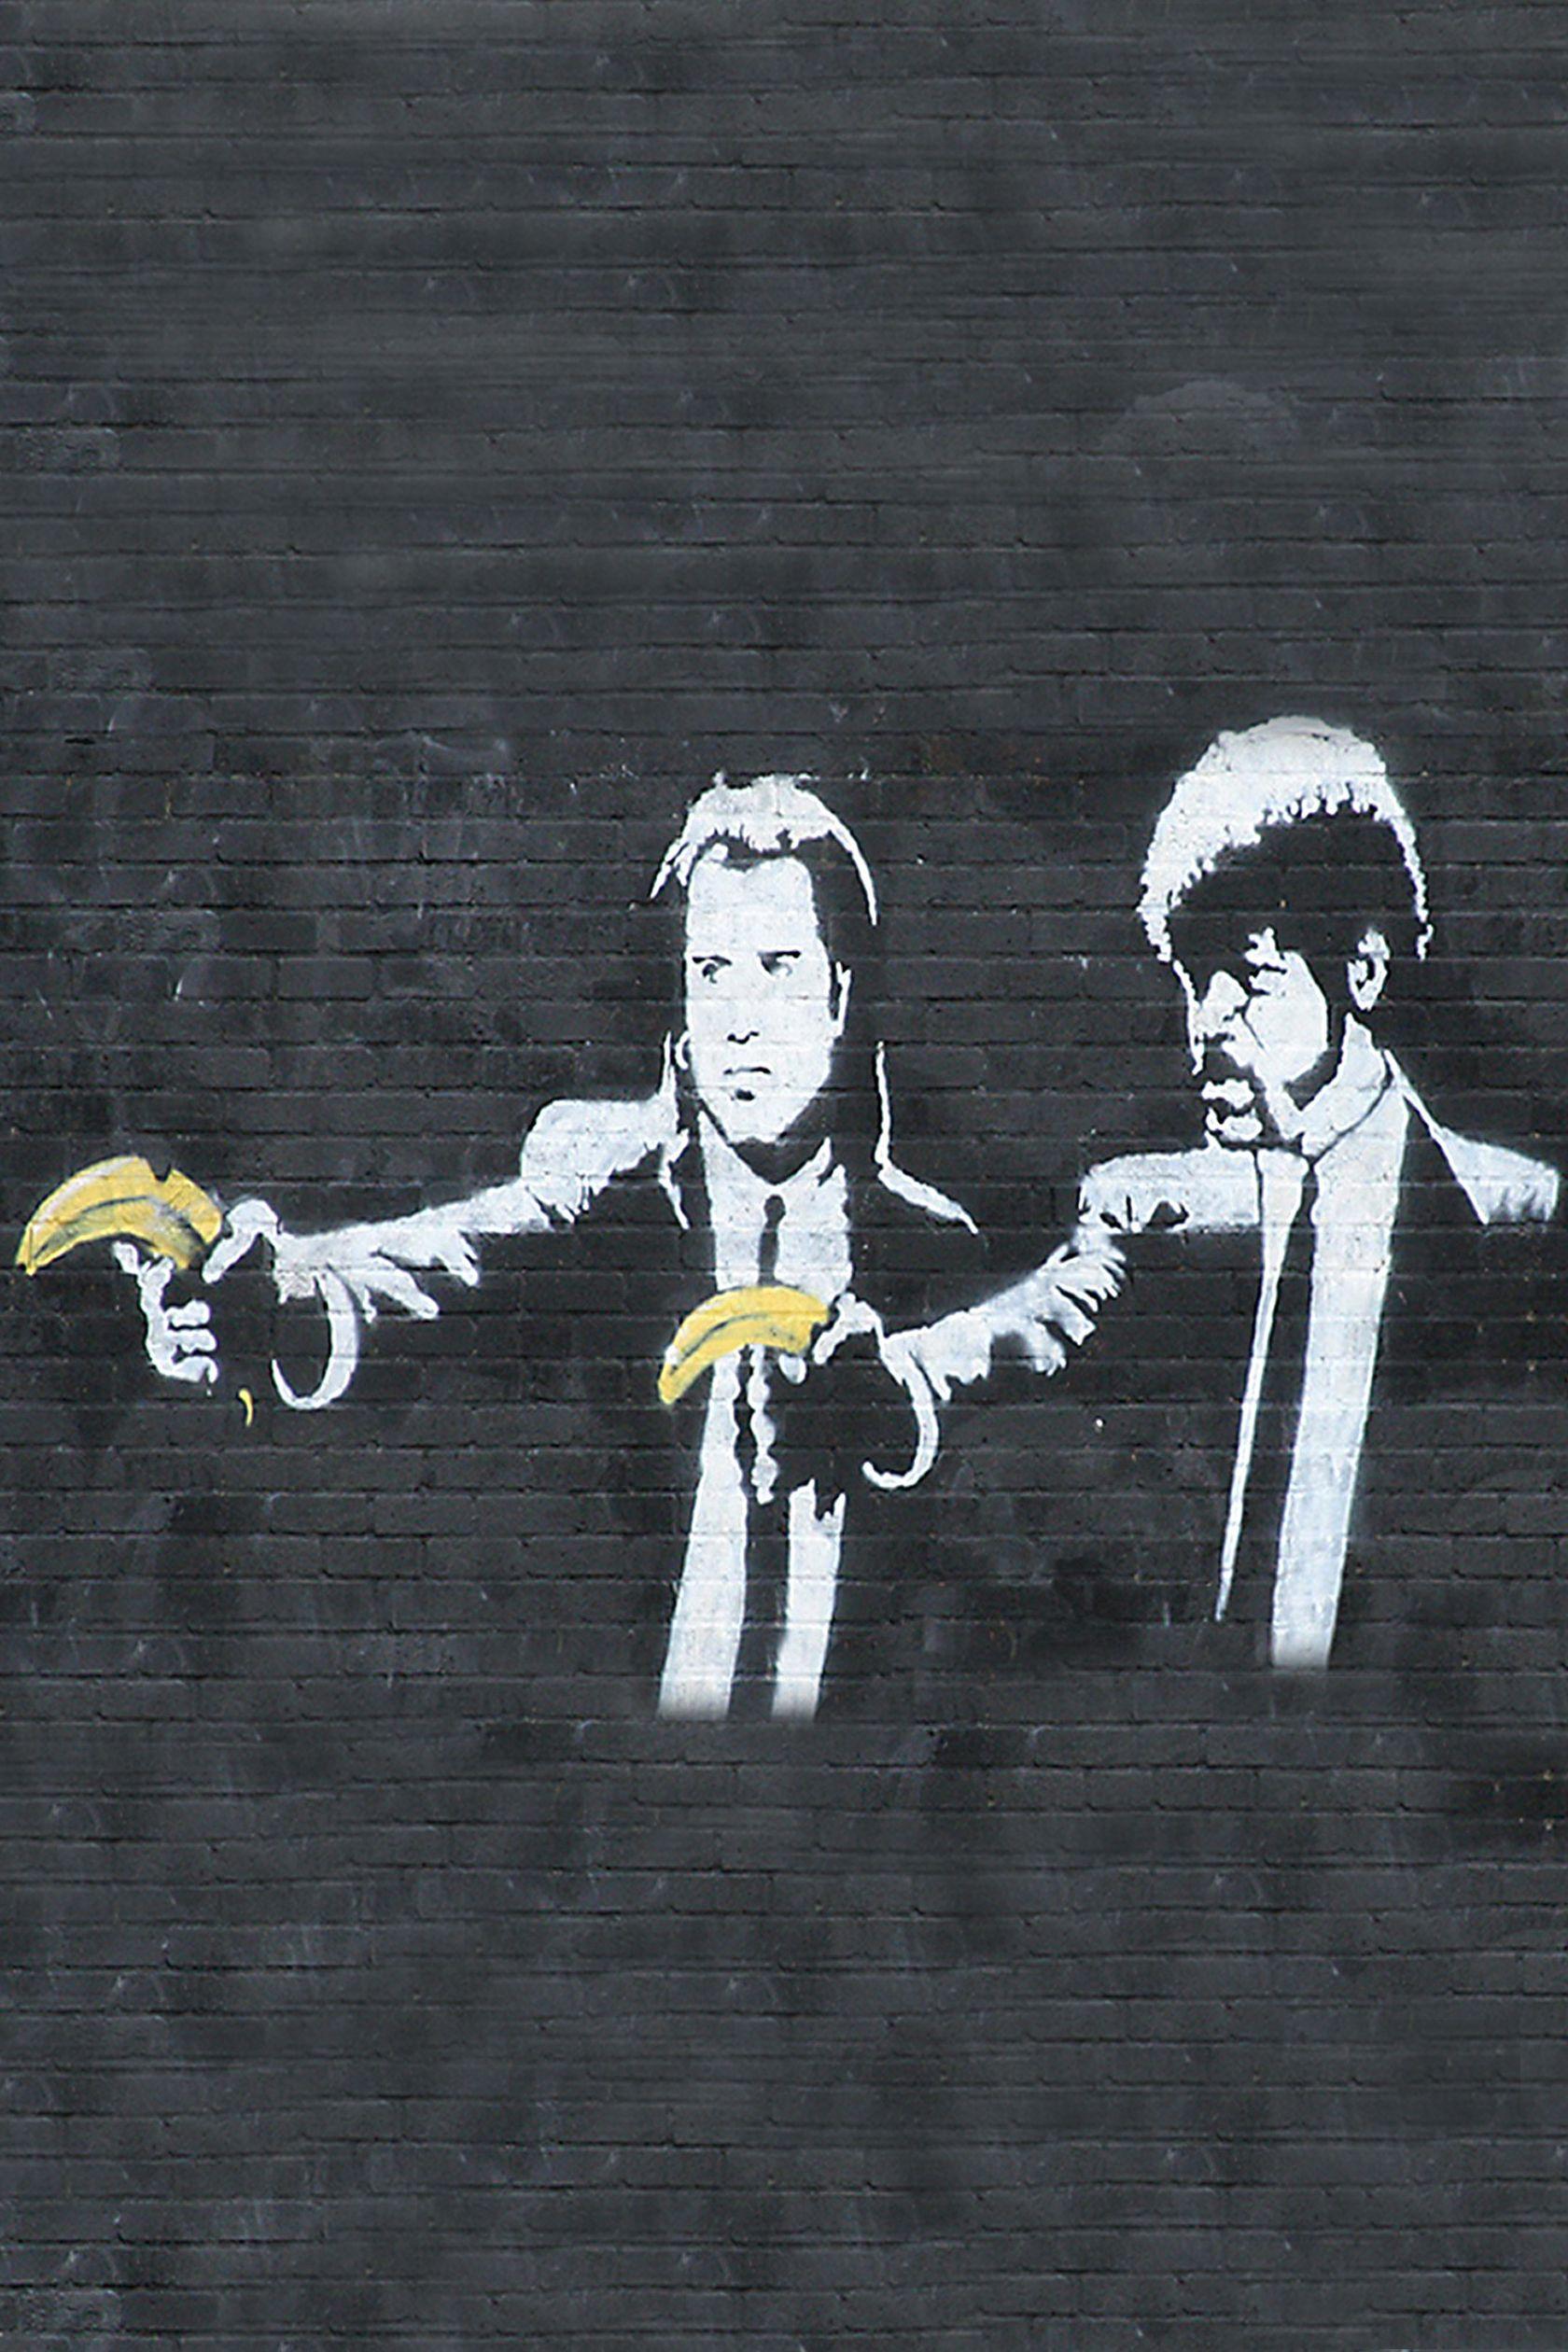 Banksy Wallpaper by 40thieves on DeviantArt